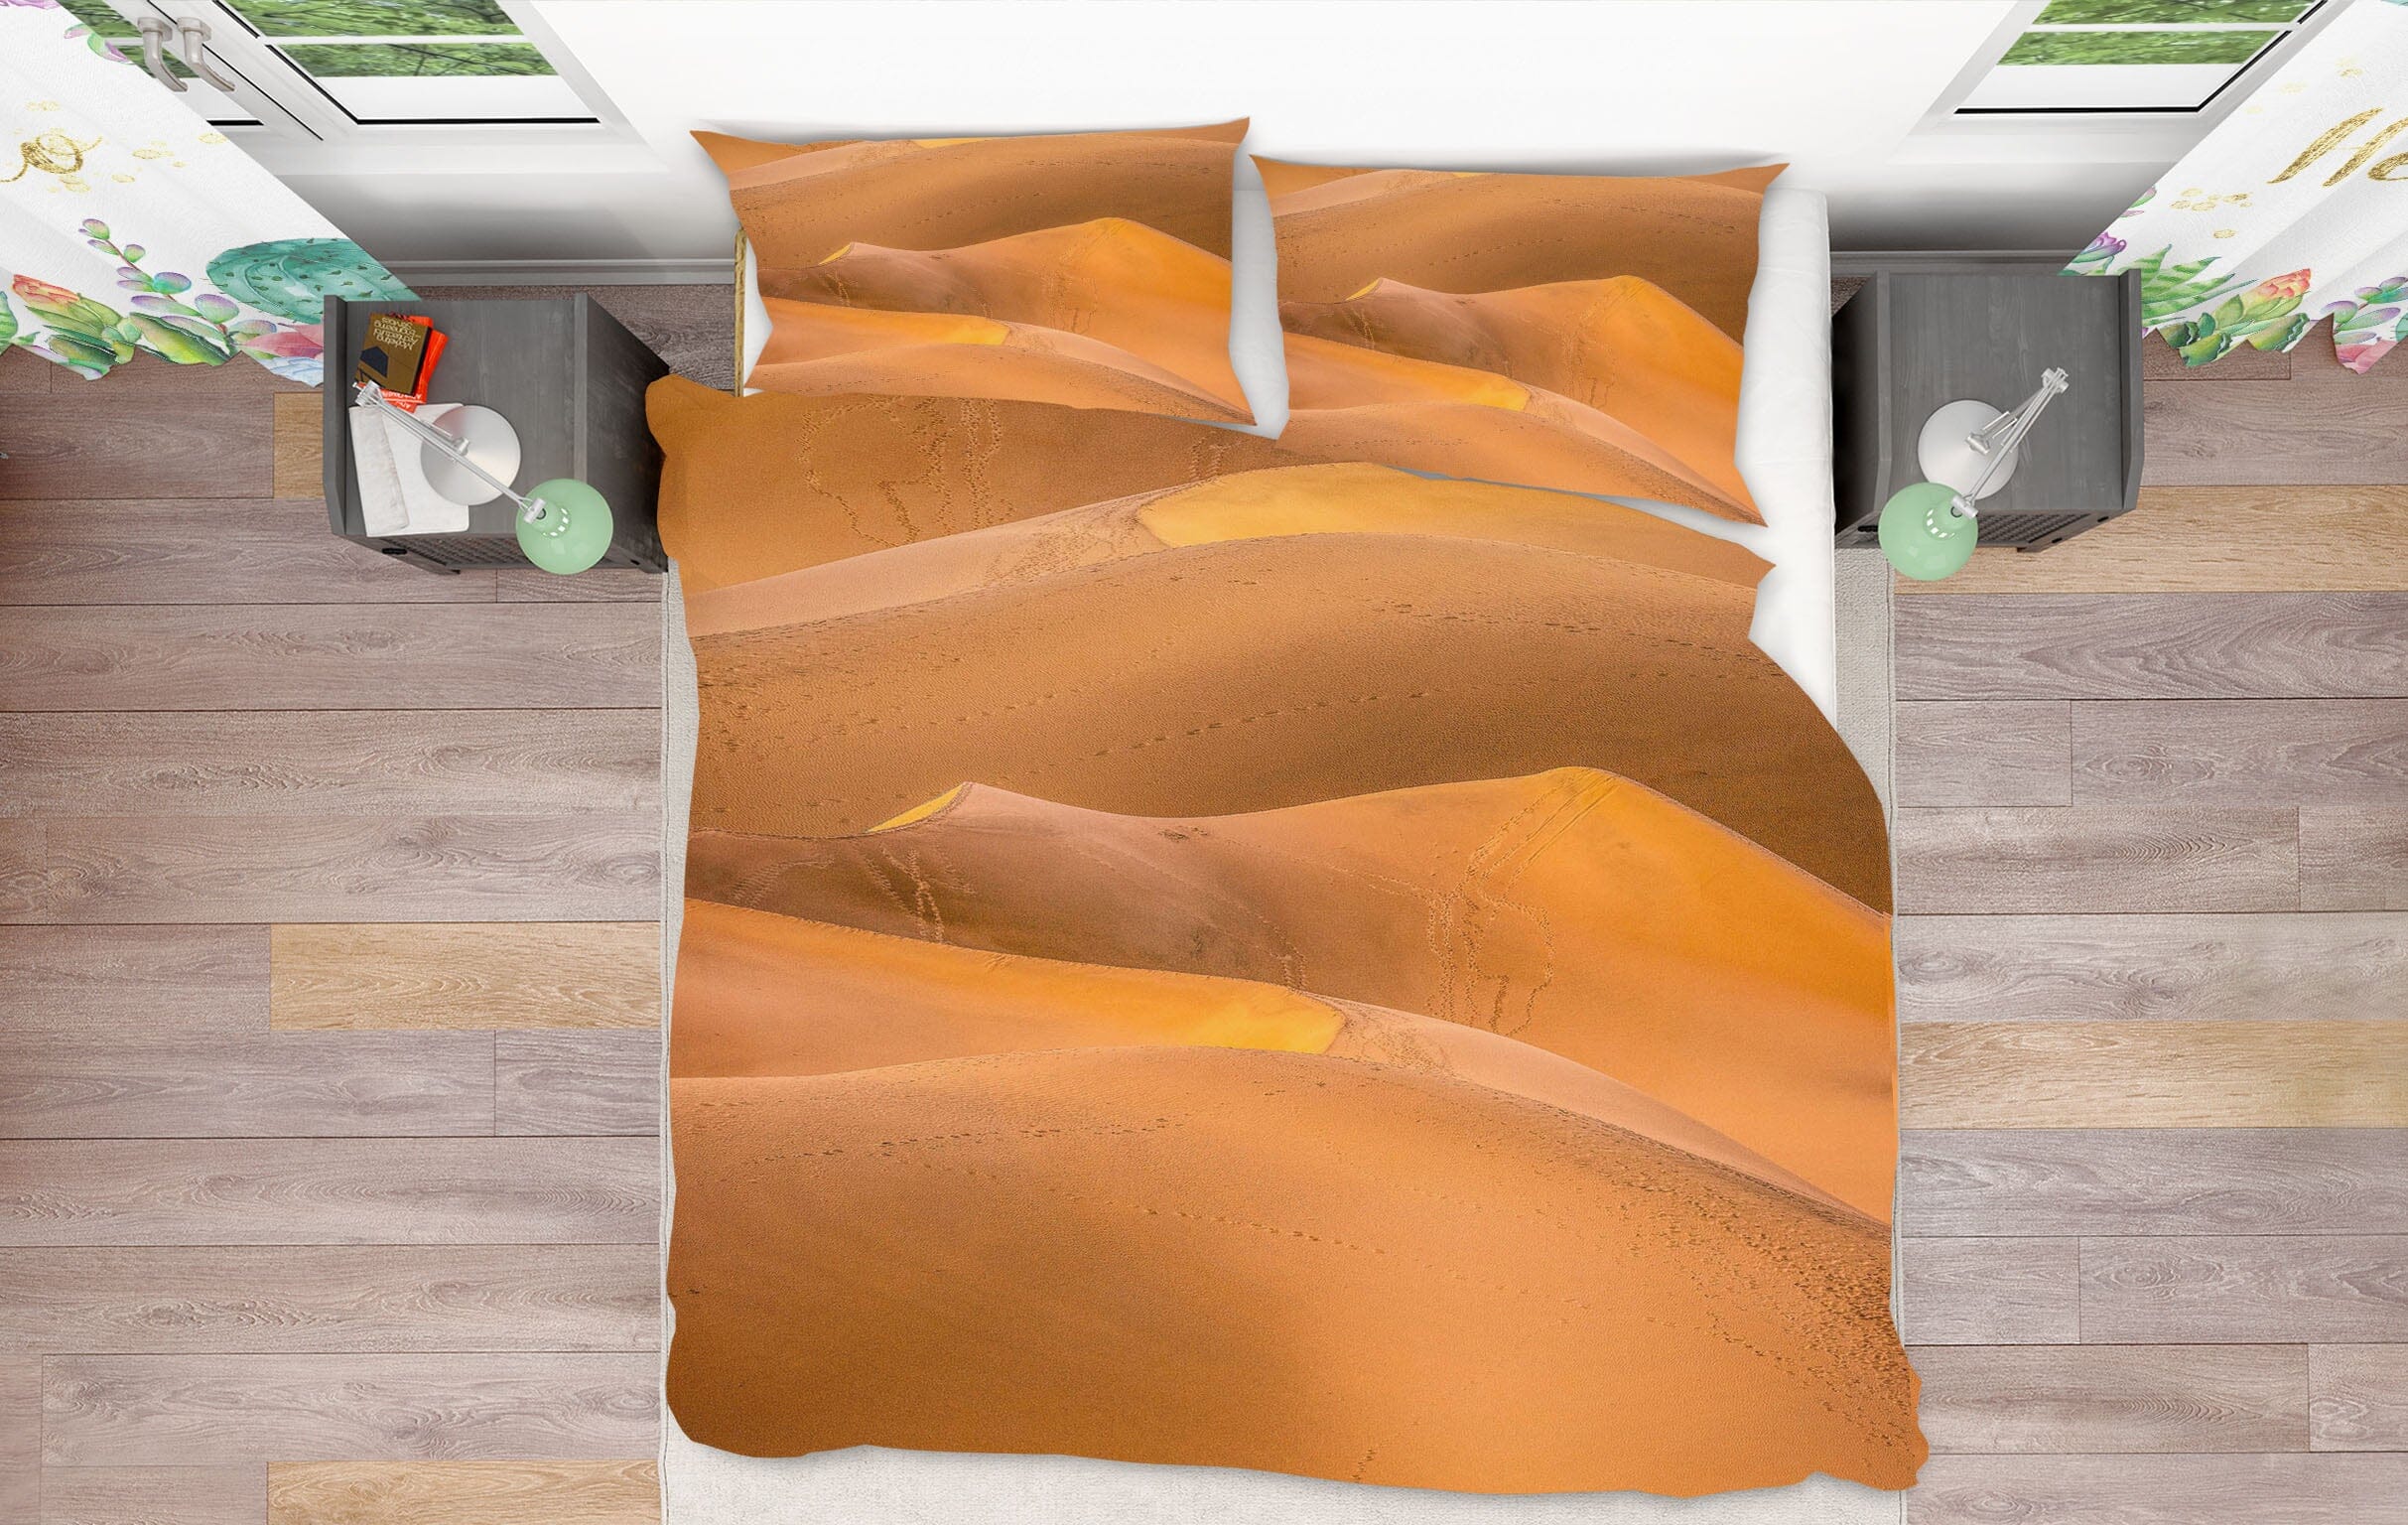 3D Loess Plateau 2162 Marco Carmassi Bedding Bed Pillowcases Quilt Quiet Covers AJ Creativity Home 